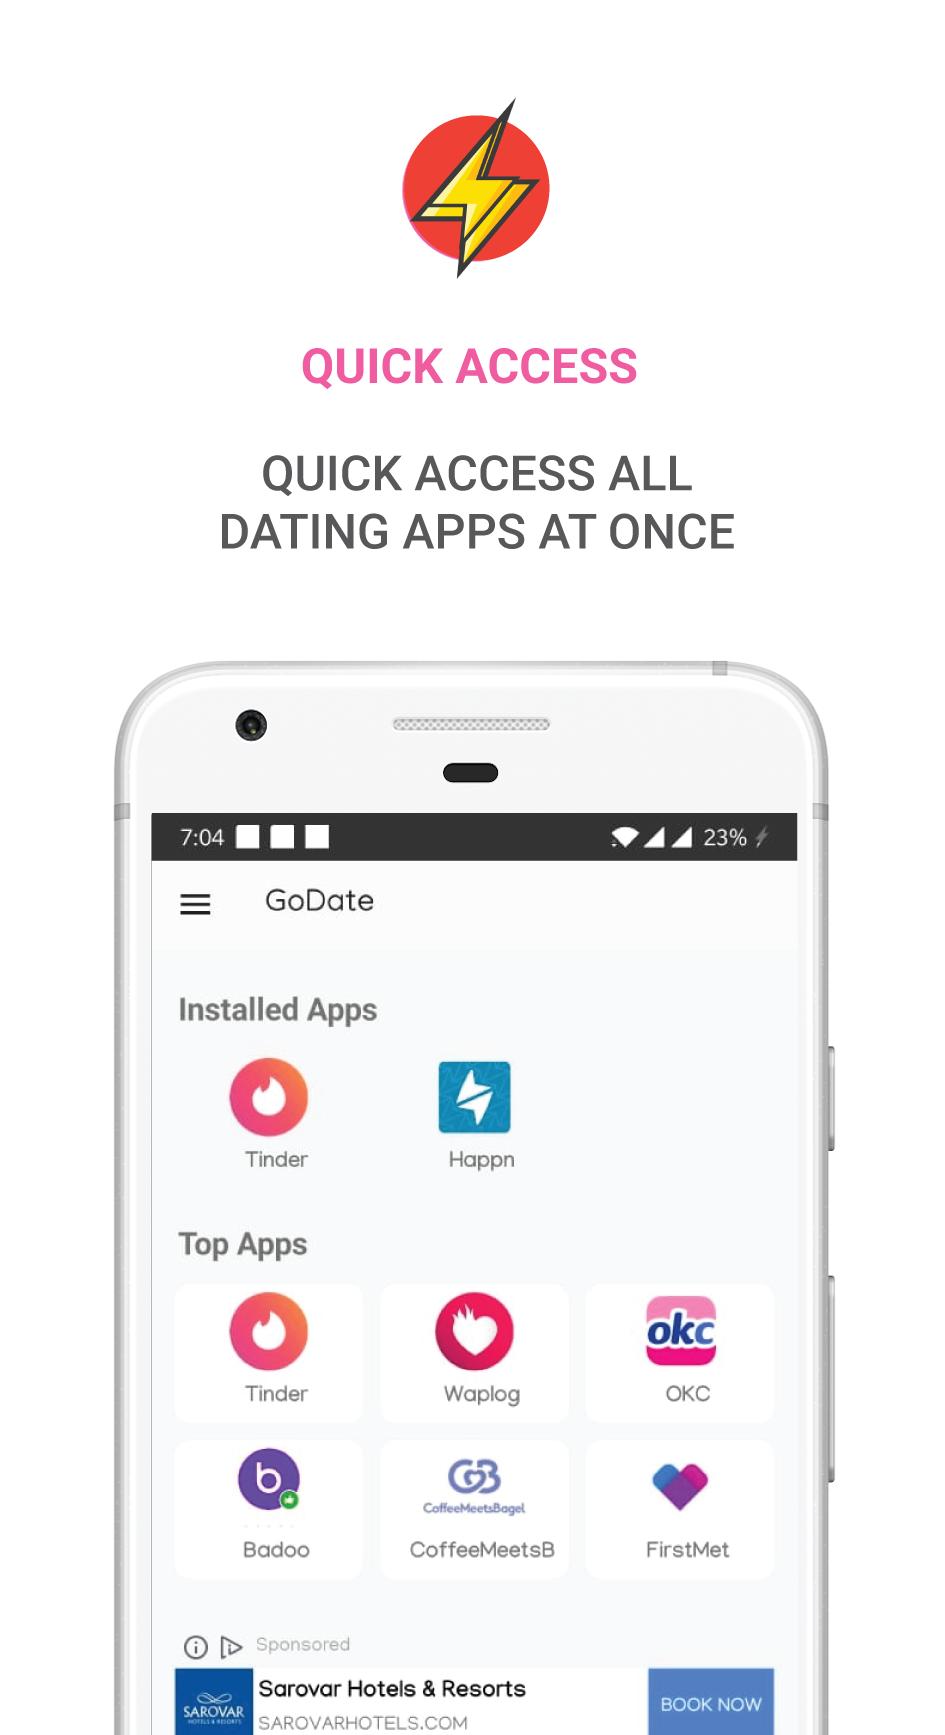 5 online online dating sites and apps to be careful of, post Ashley Madison hack